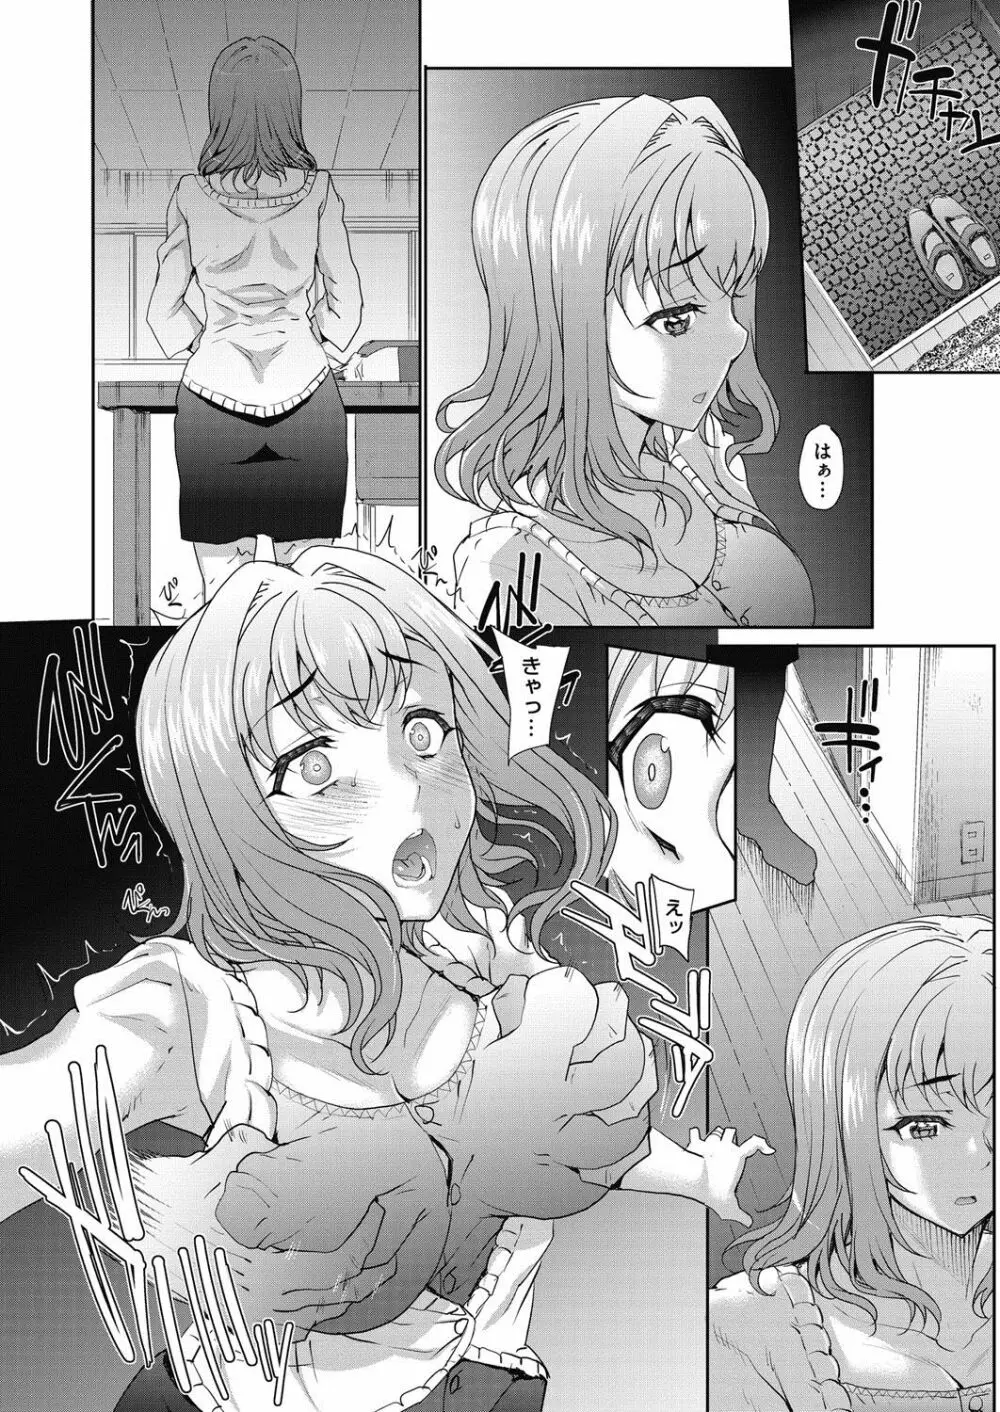 [Carn] Tanshinfunin ~Sisters~ Ch 1-7 27ページ